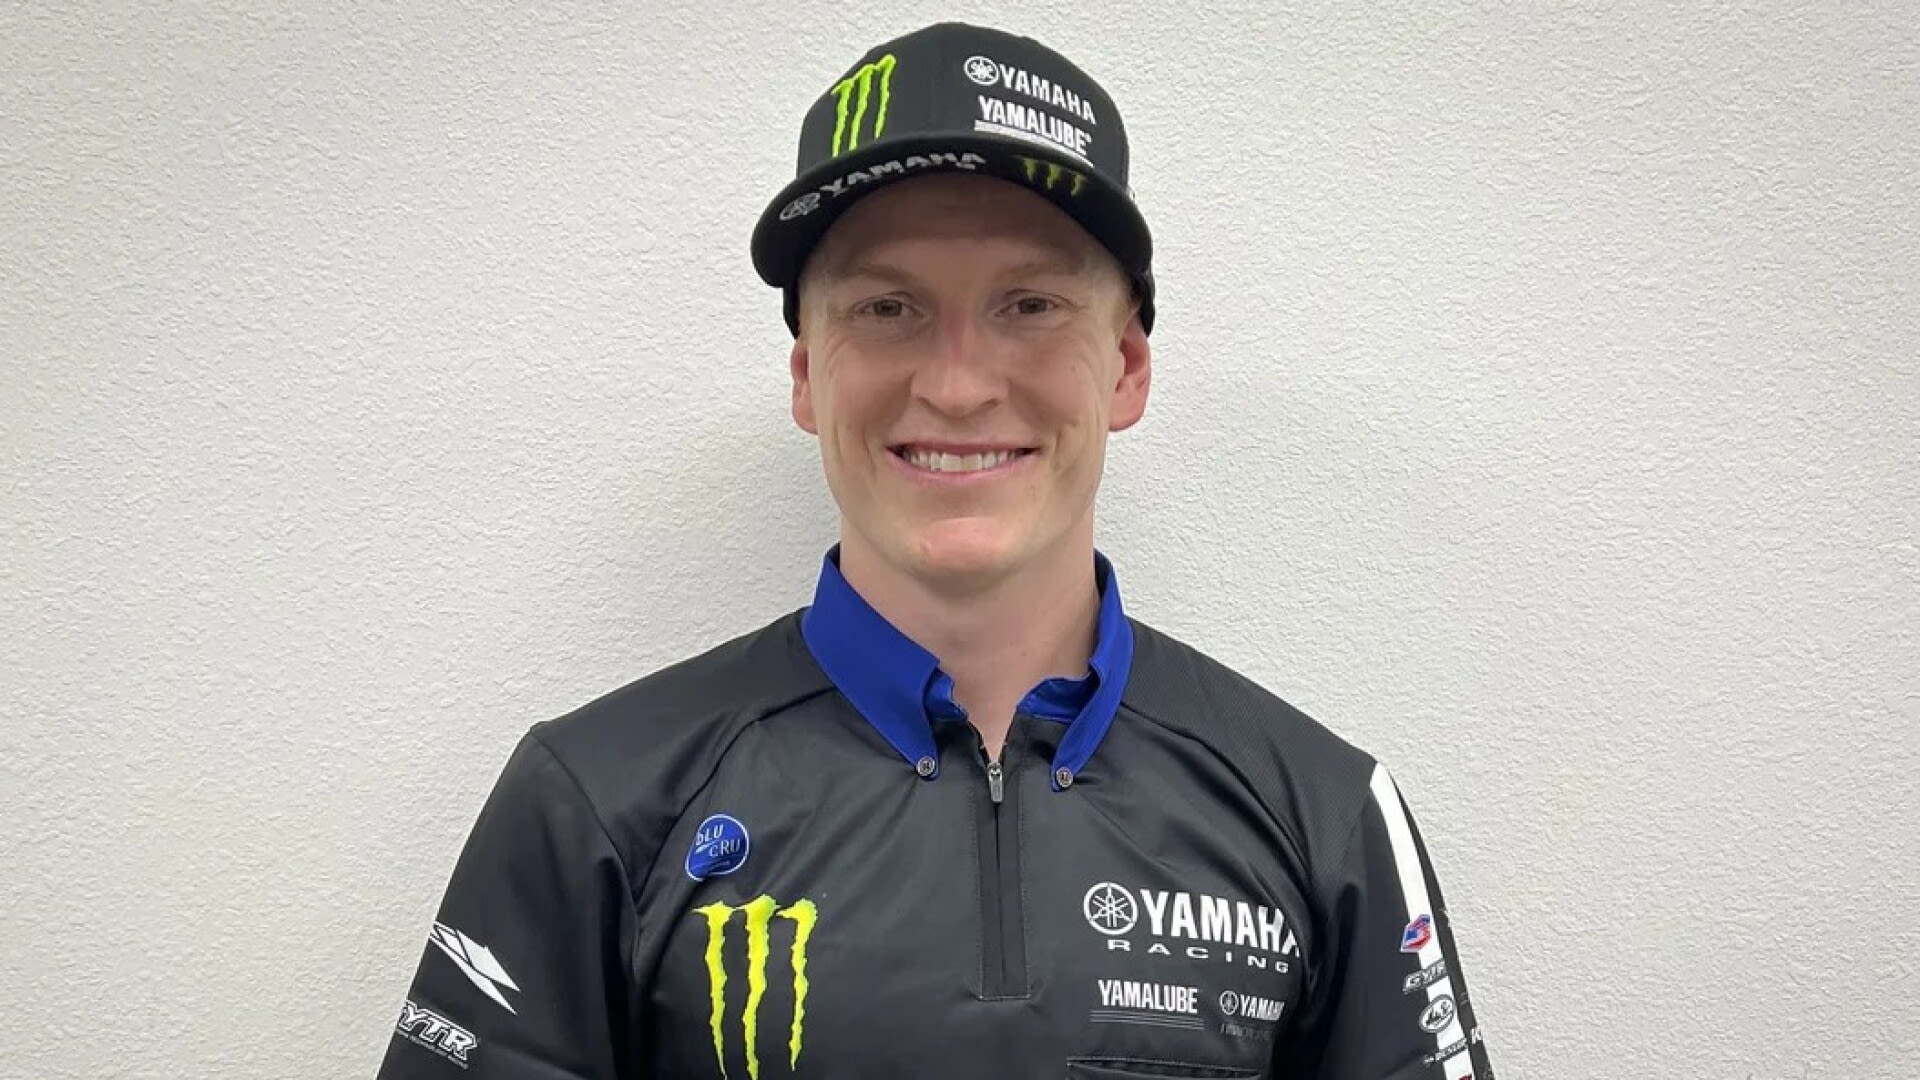 One day after Firepower Honda release, Max Anstie announces Star Racing Yamaha deal